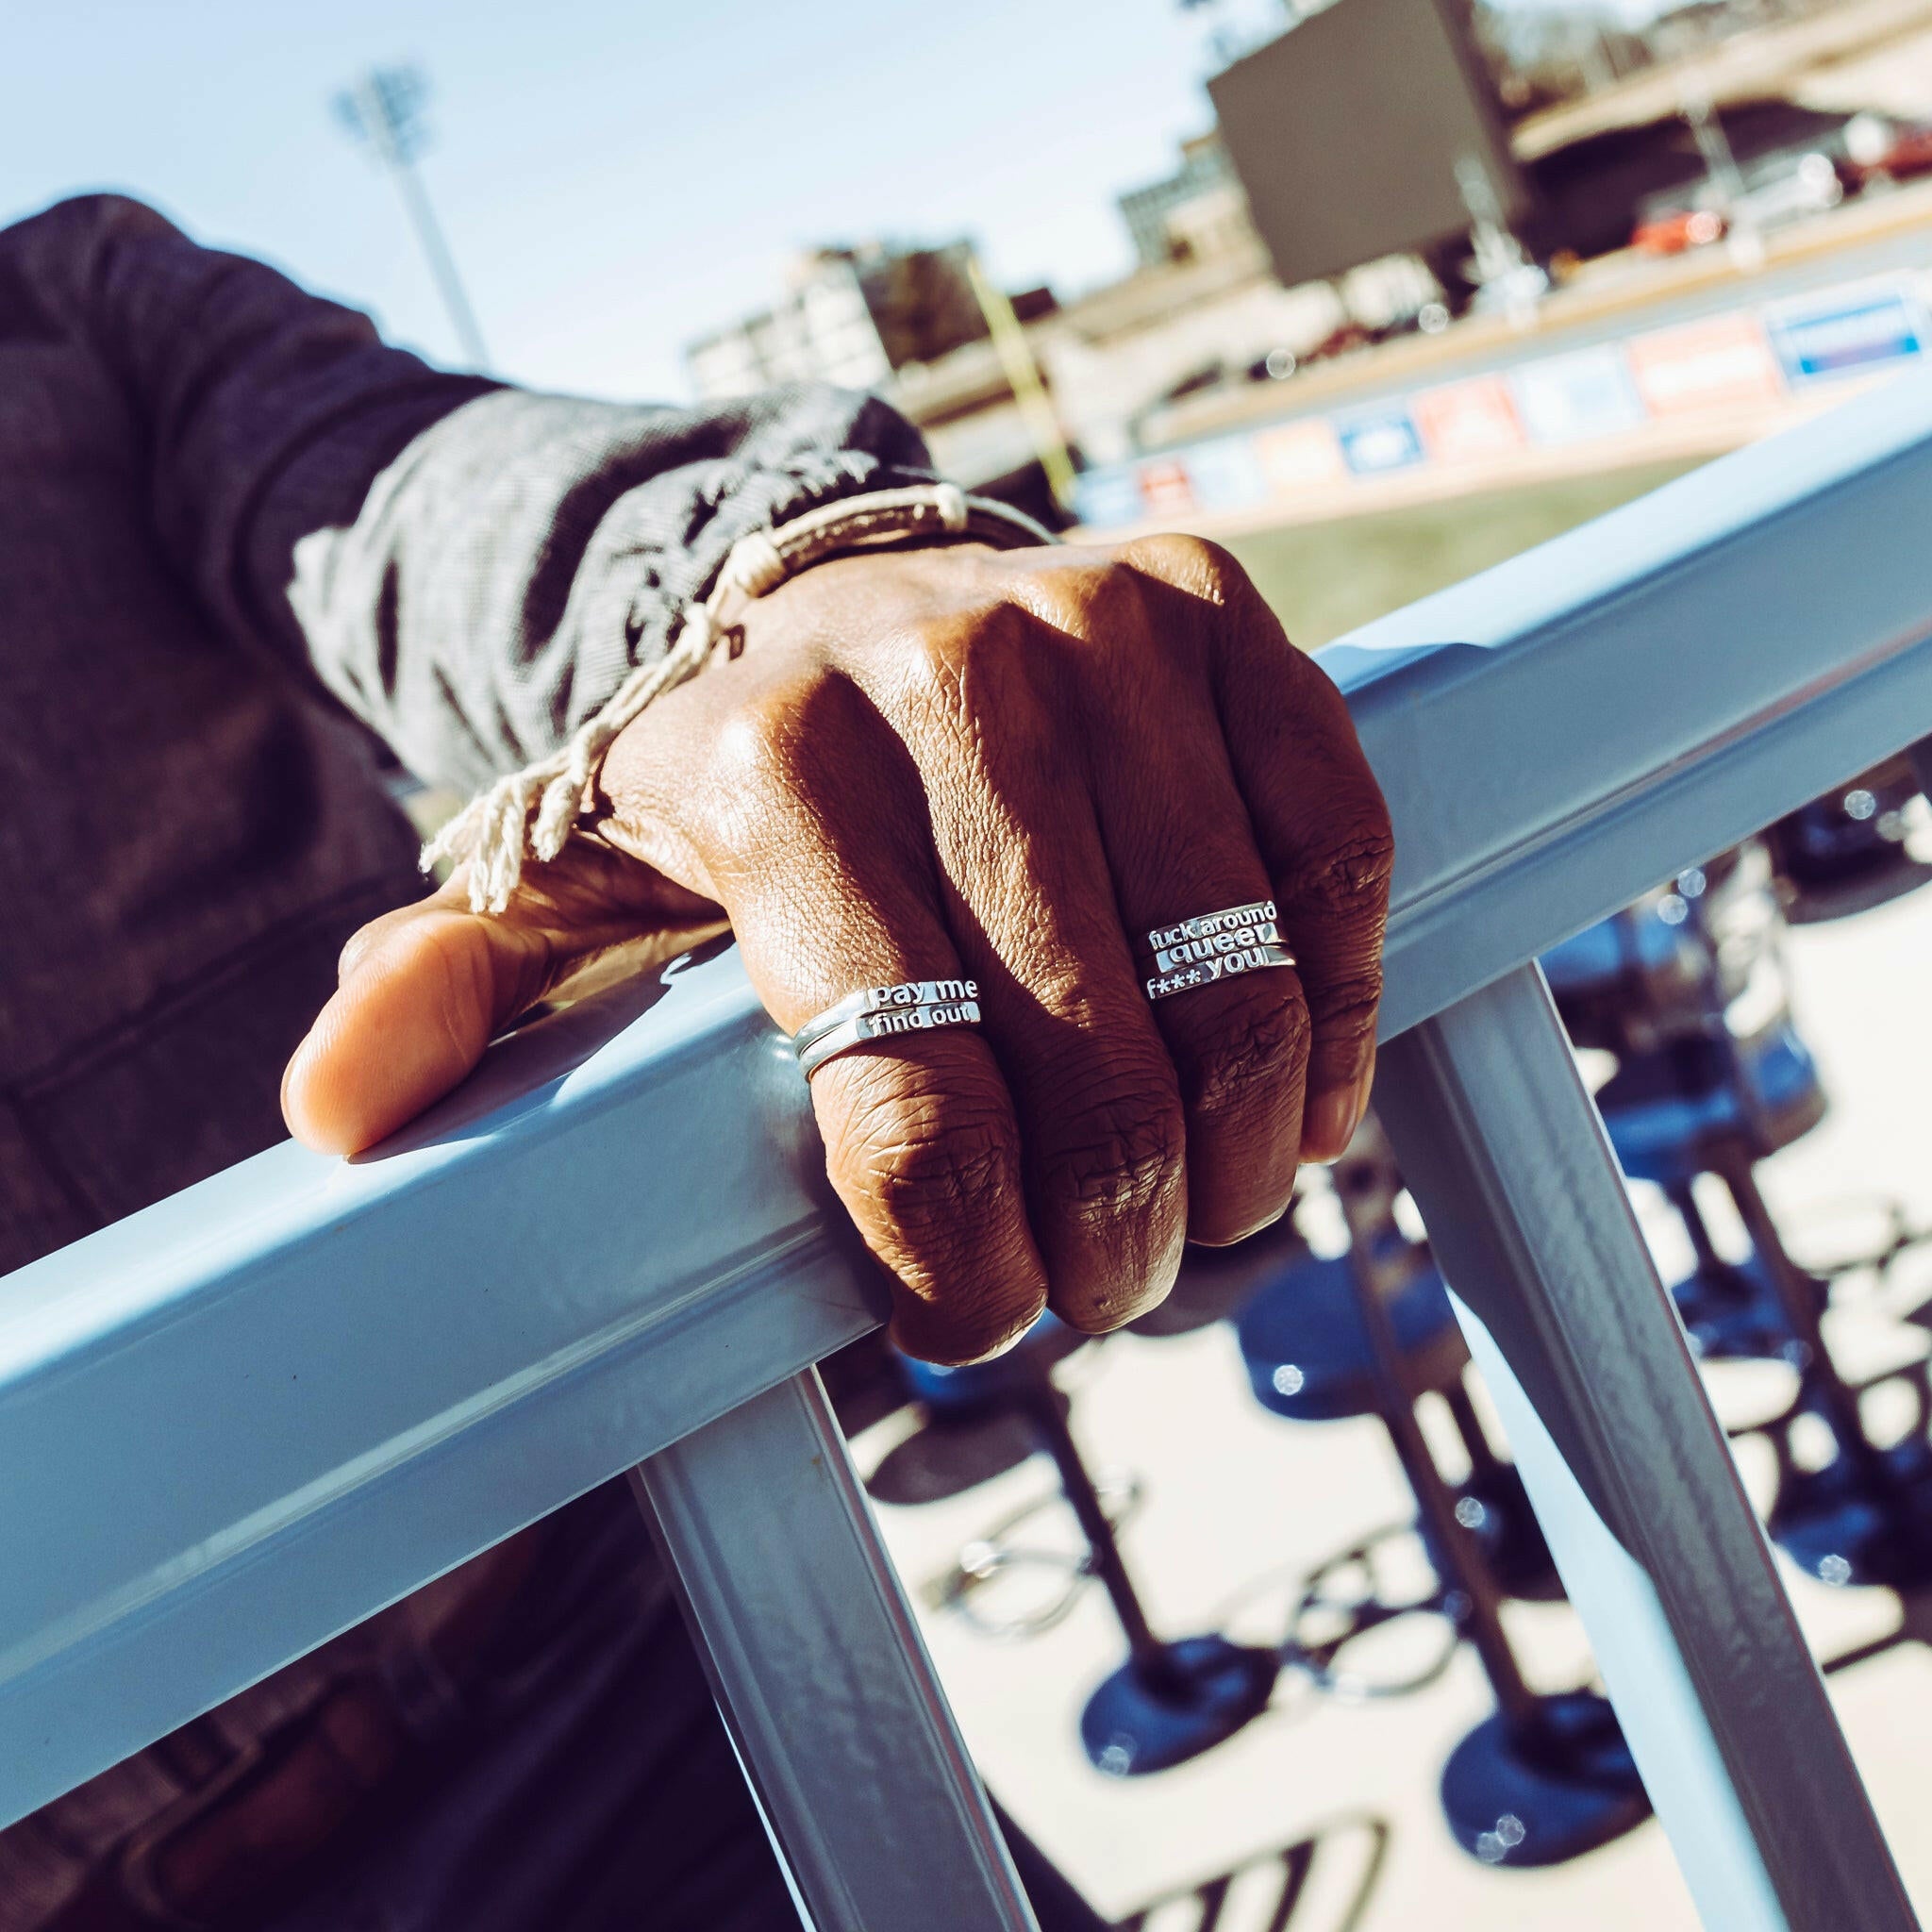 Hand holding a Railing displaying five Sterling Silver Word rings. Far Left (Index Finger)- two rings stacked atop one another, the top one being a ring that reads the text "Pay Me" the bottom ring reads "Find Out". Far Right (Ring Finger) Has 3 rings stacked on one another. The top rings reads text saying "Fuck Around". The middle ring has text that reads "queer". The bottom ring has text that reads "F*** you" a censored version of "fuck you"